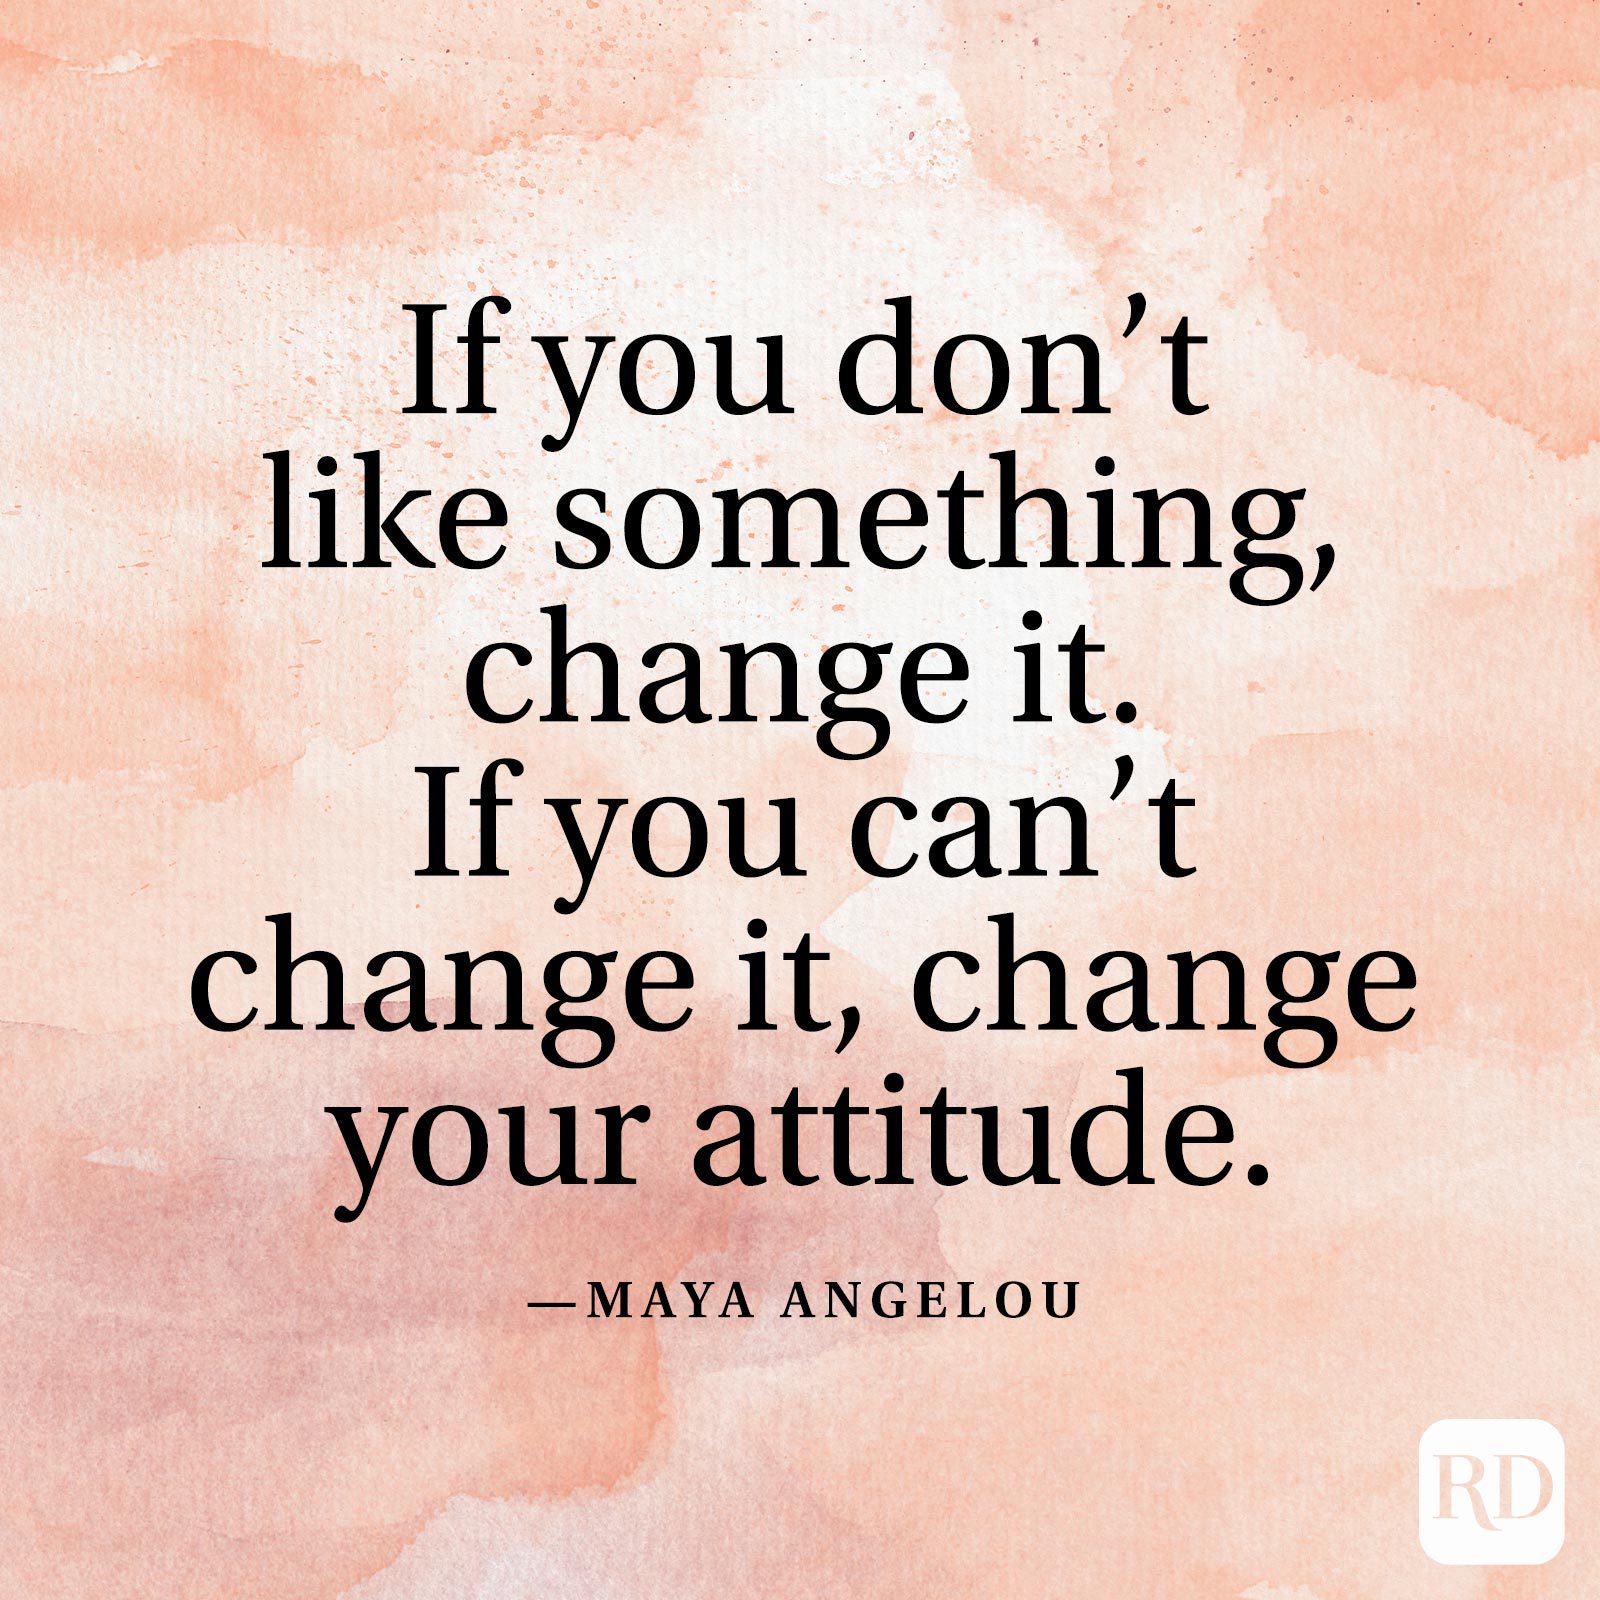 "If you don't like something, change it. If you can’t change it, change your attitude." —Maya Angelou